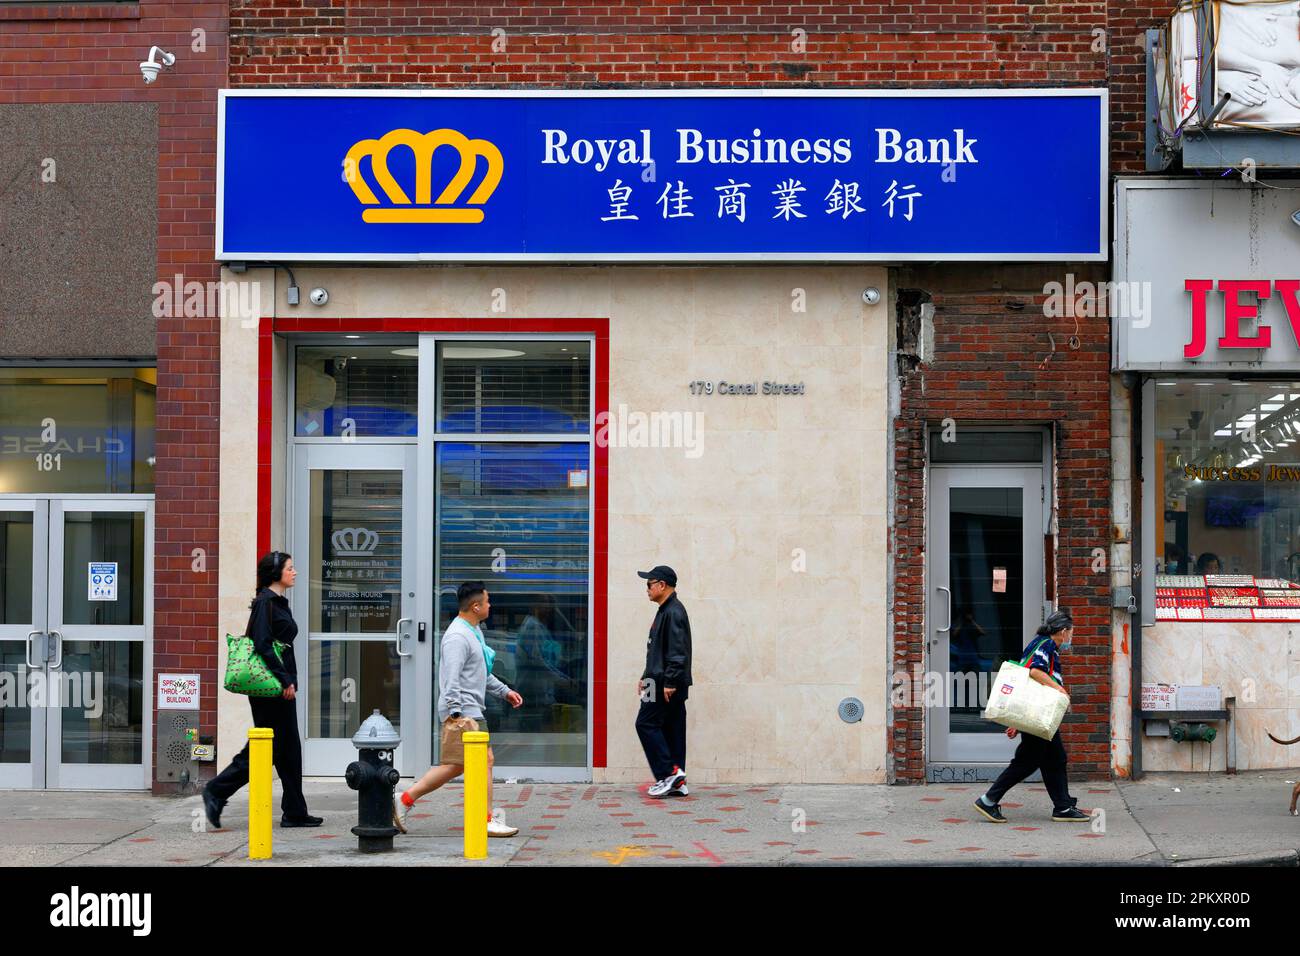 Royal Business Bank 皇佳商業銀行, 179 Canal St, New York. NYC storefront photo of a Chinese American bank in Manhattan Chinatown. Stock Photo